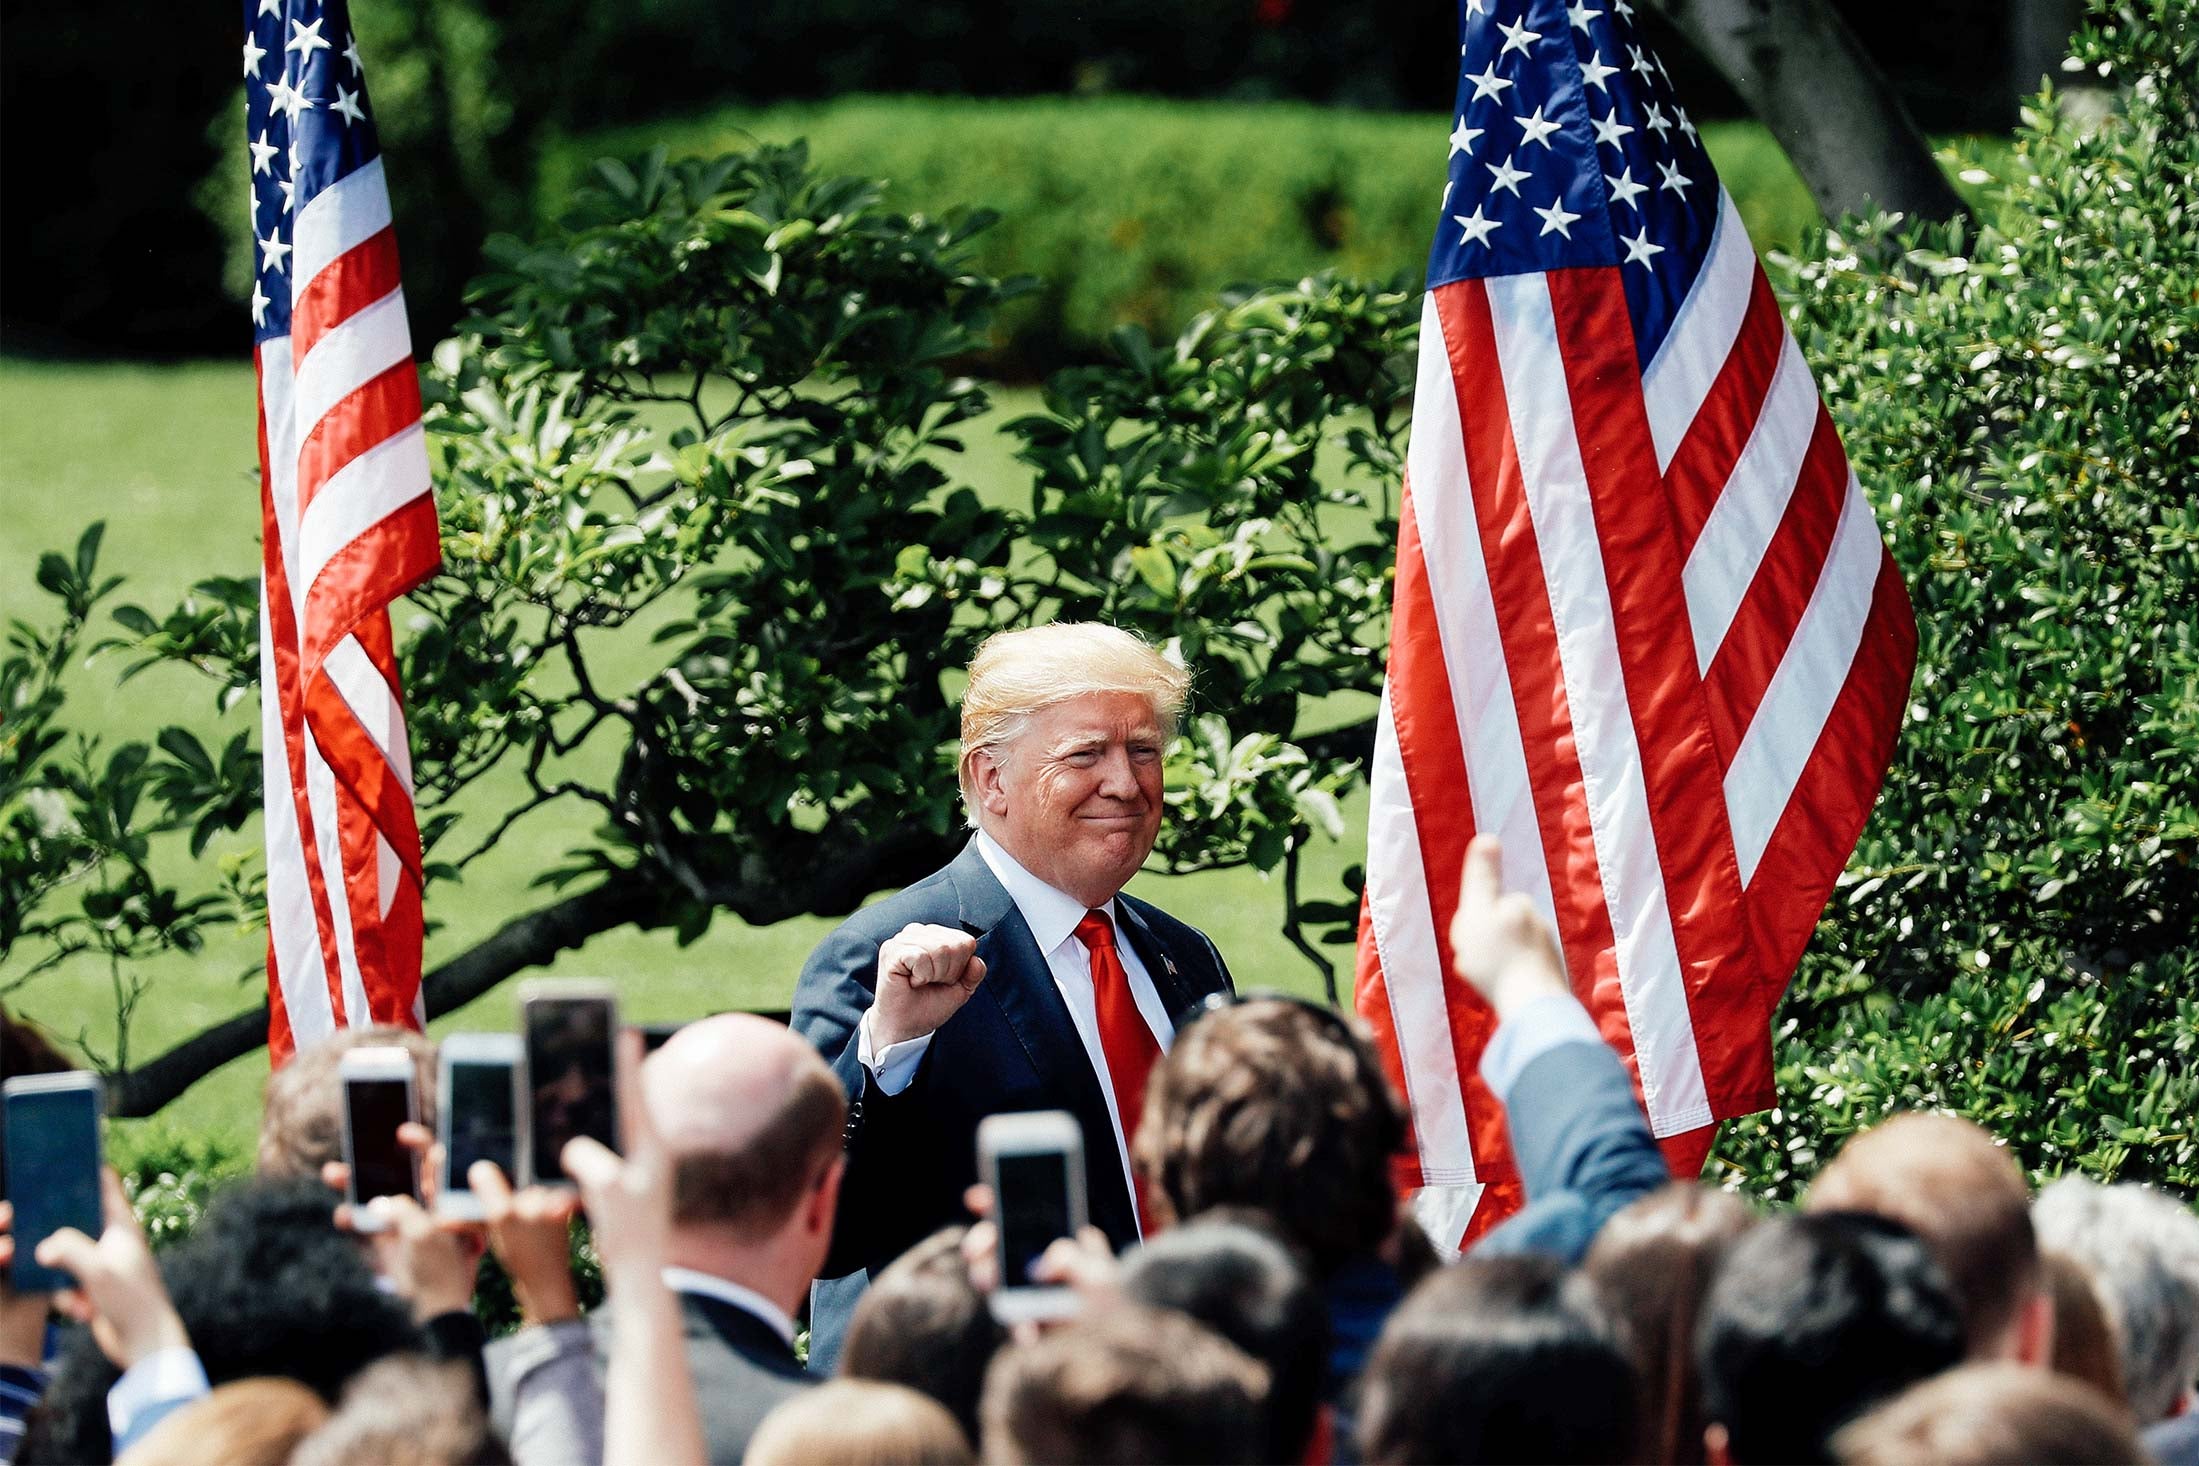 Donald Trump pumps his fist as he departs his “Celebration of America” event on the South Lawn of the White House in Washington on Tuesday.